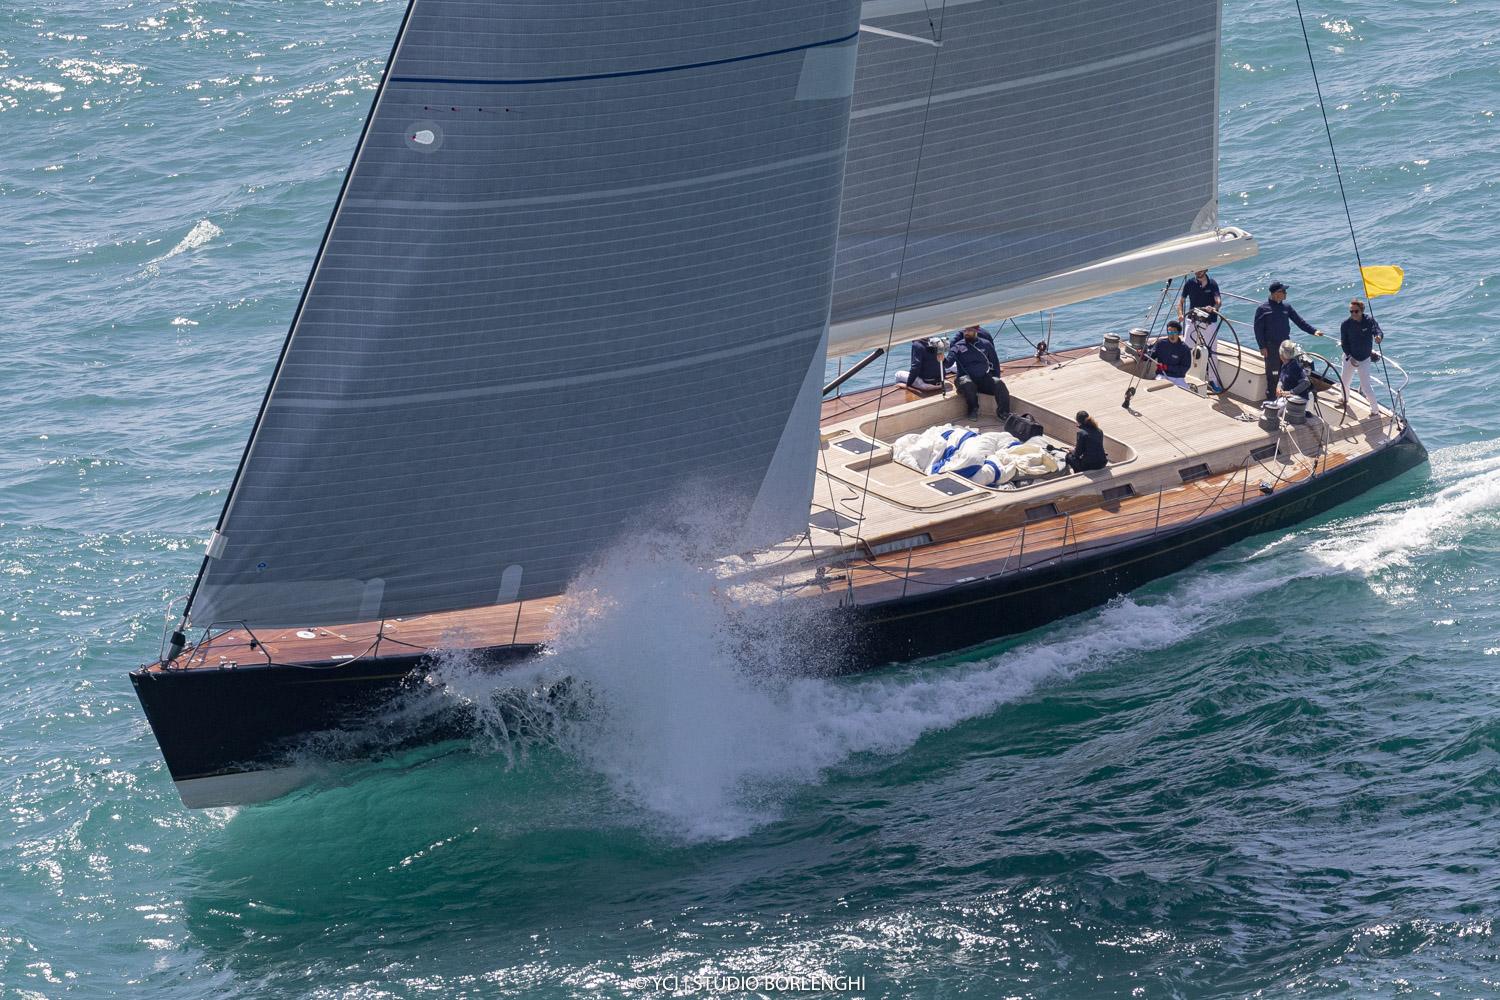 Wally supports magnificent return of Maxi racing to Portofino